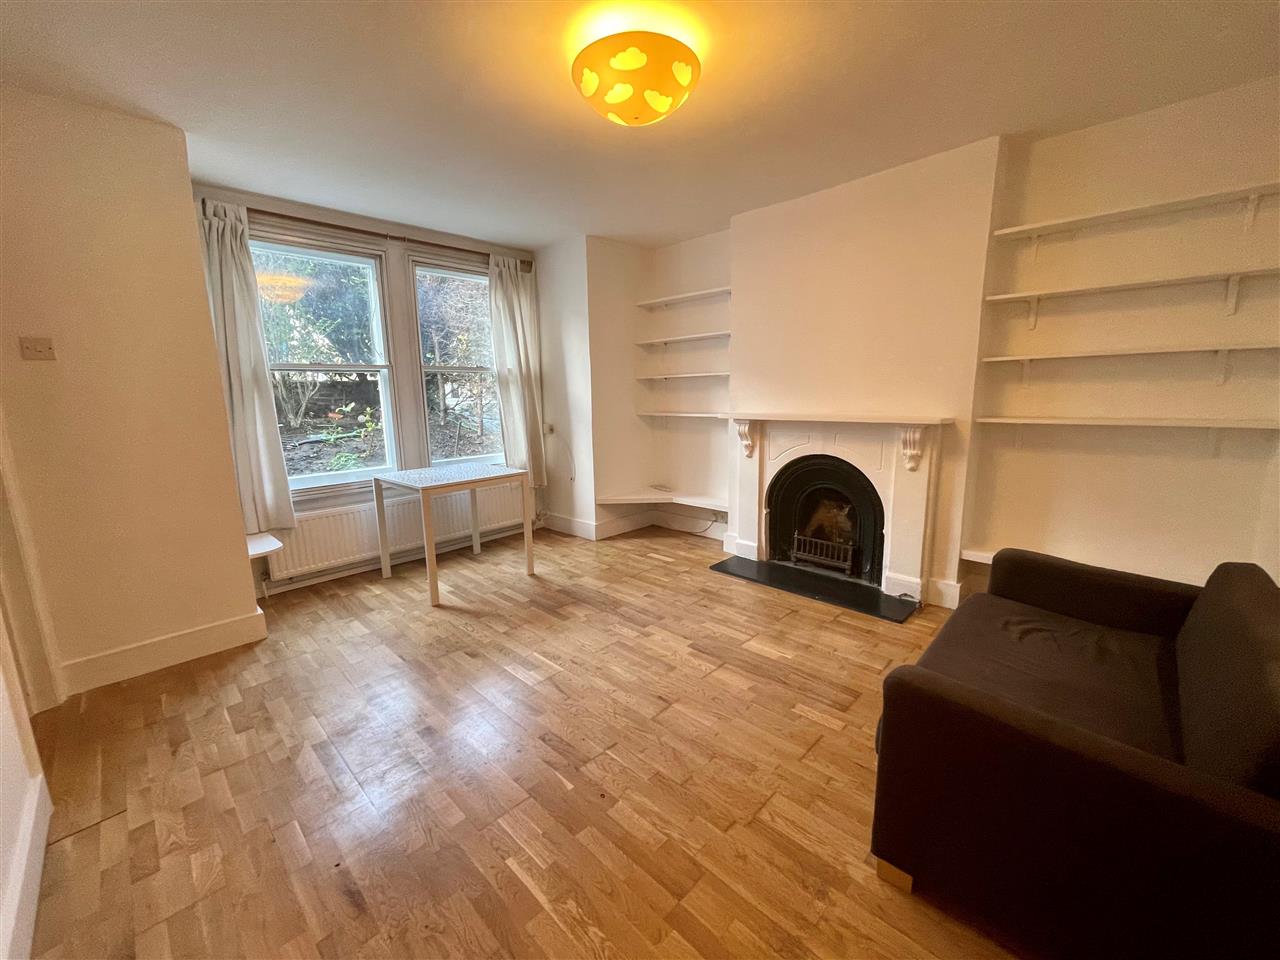 AVAILABLE FROM 12TH OCTOBER 2023 TO A MAXIMUM OF TWO NON-RELATED SHARERS. Located close to Tufnell Park underground station (Northern Line) and the trendy mix of shops, bars and restaurants on Fortess Road, NW5 is the lower ground floor PART FURNISHED converted flat. The accommodation comprises ...